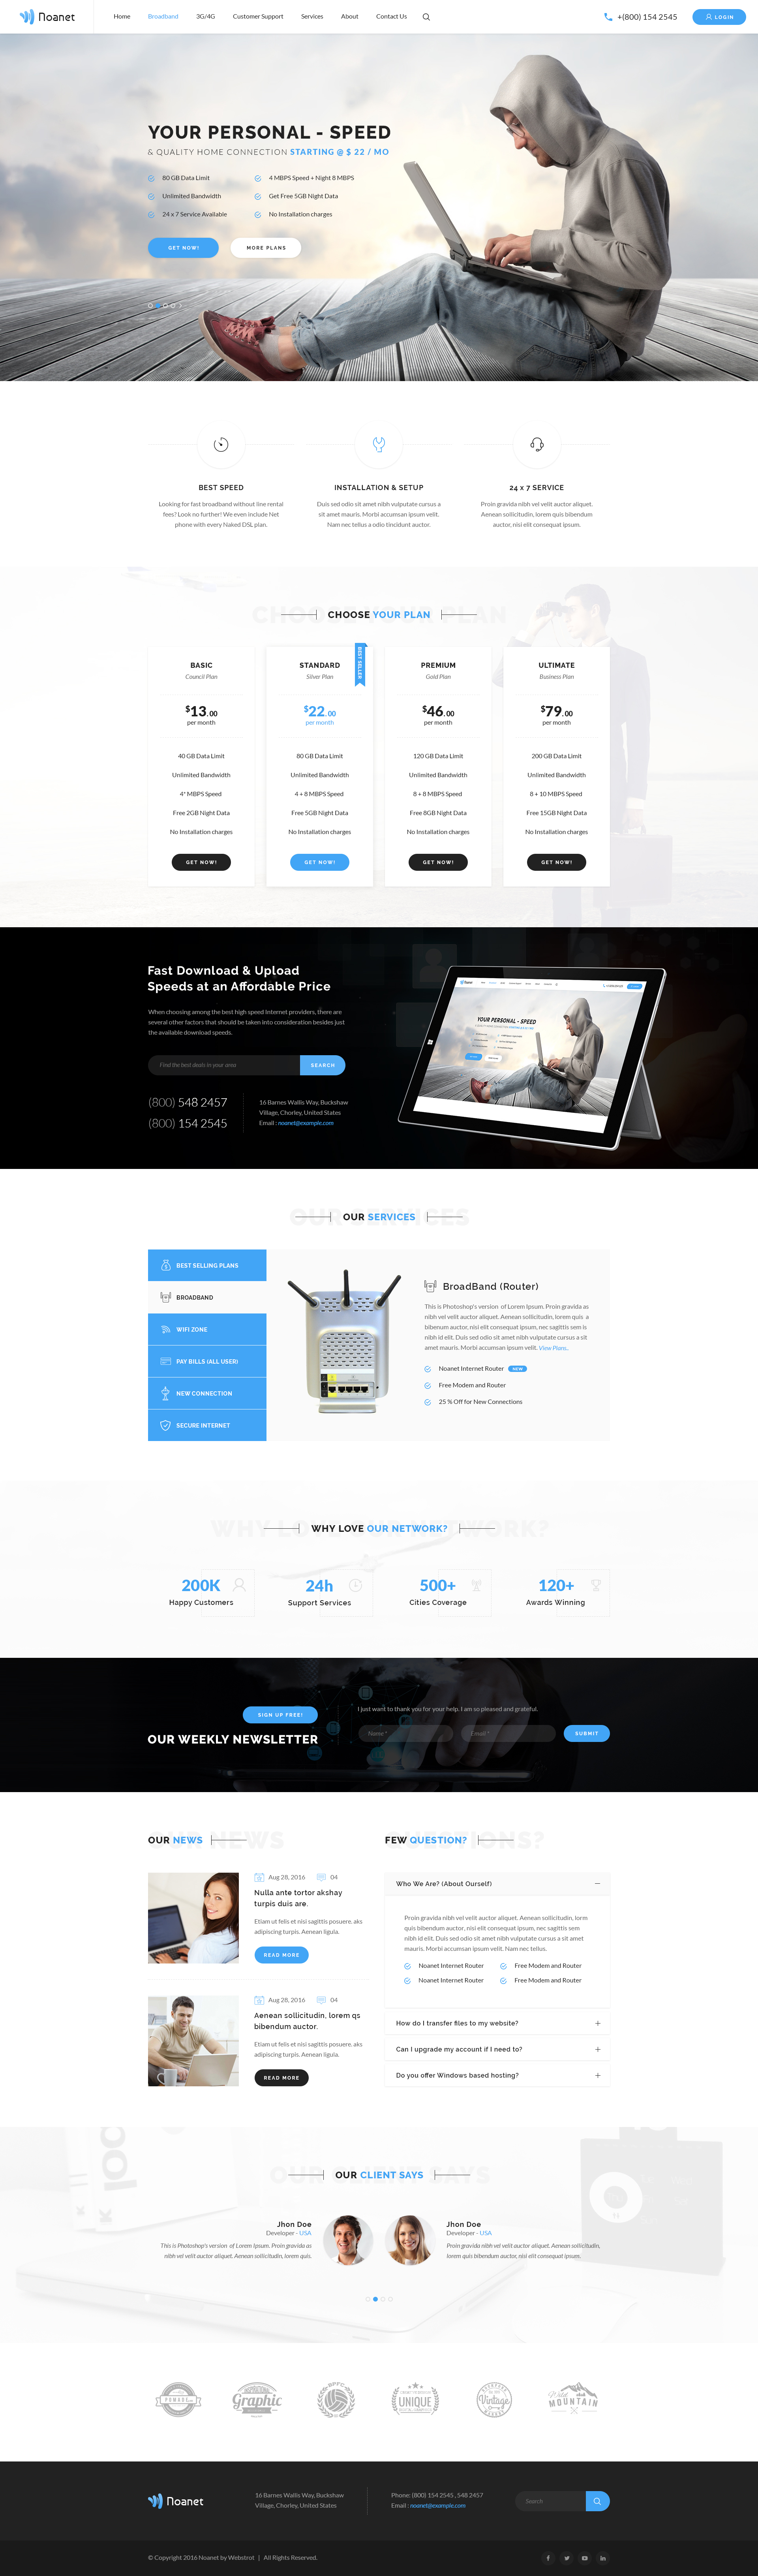 Noanet | Internet Provider and Digital Network PSD Template